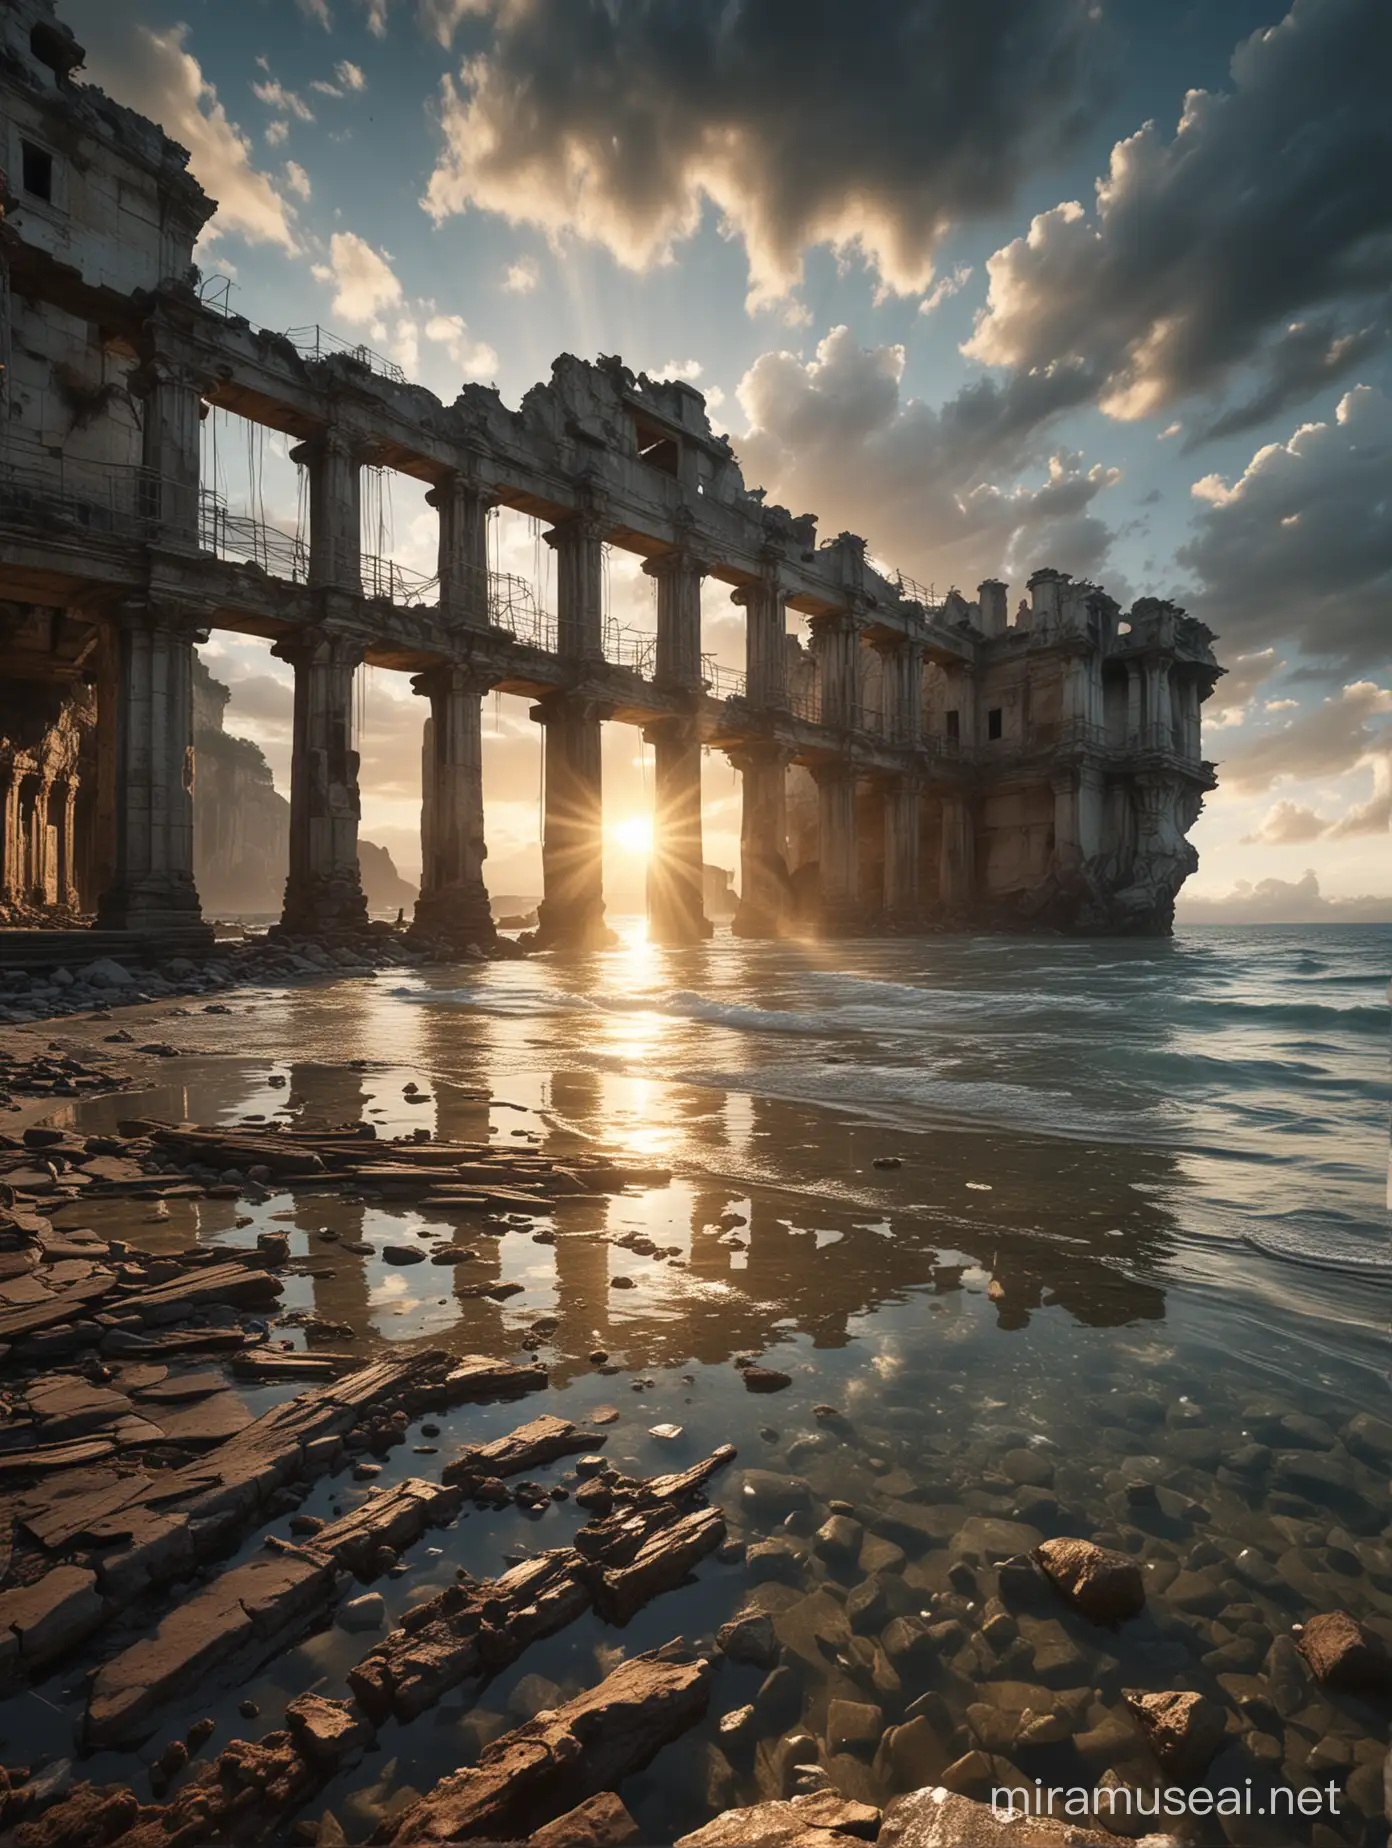 Mystical Ruins Tranquil Seascape with Abandoned Architecture